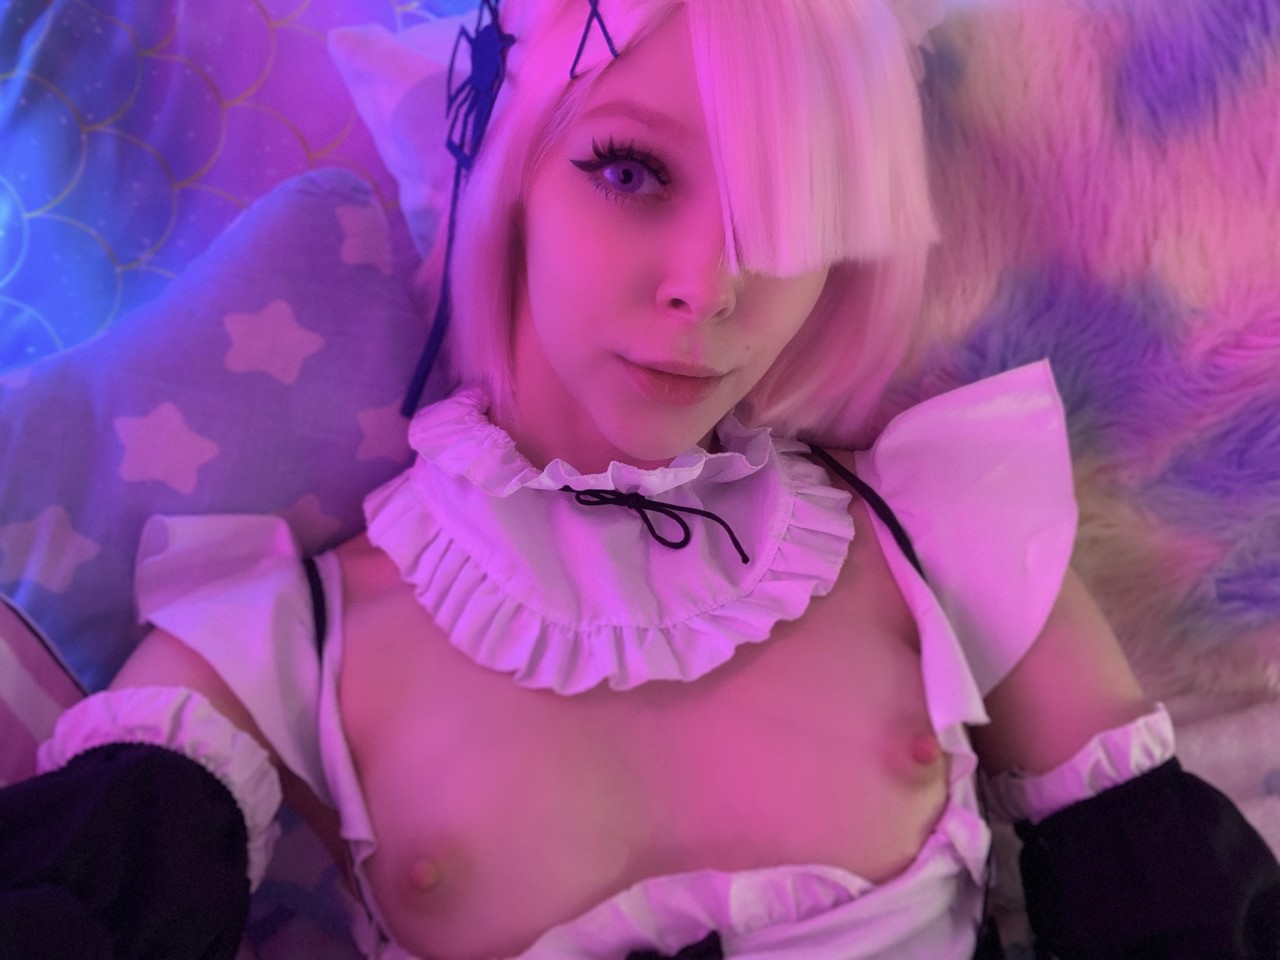 Sexy Onlyfans Babe Little Kitty Poses In Her Hot Maid Uniform In A Solo